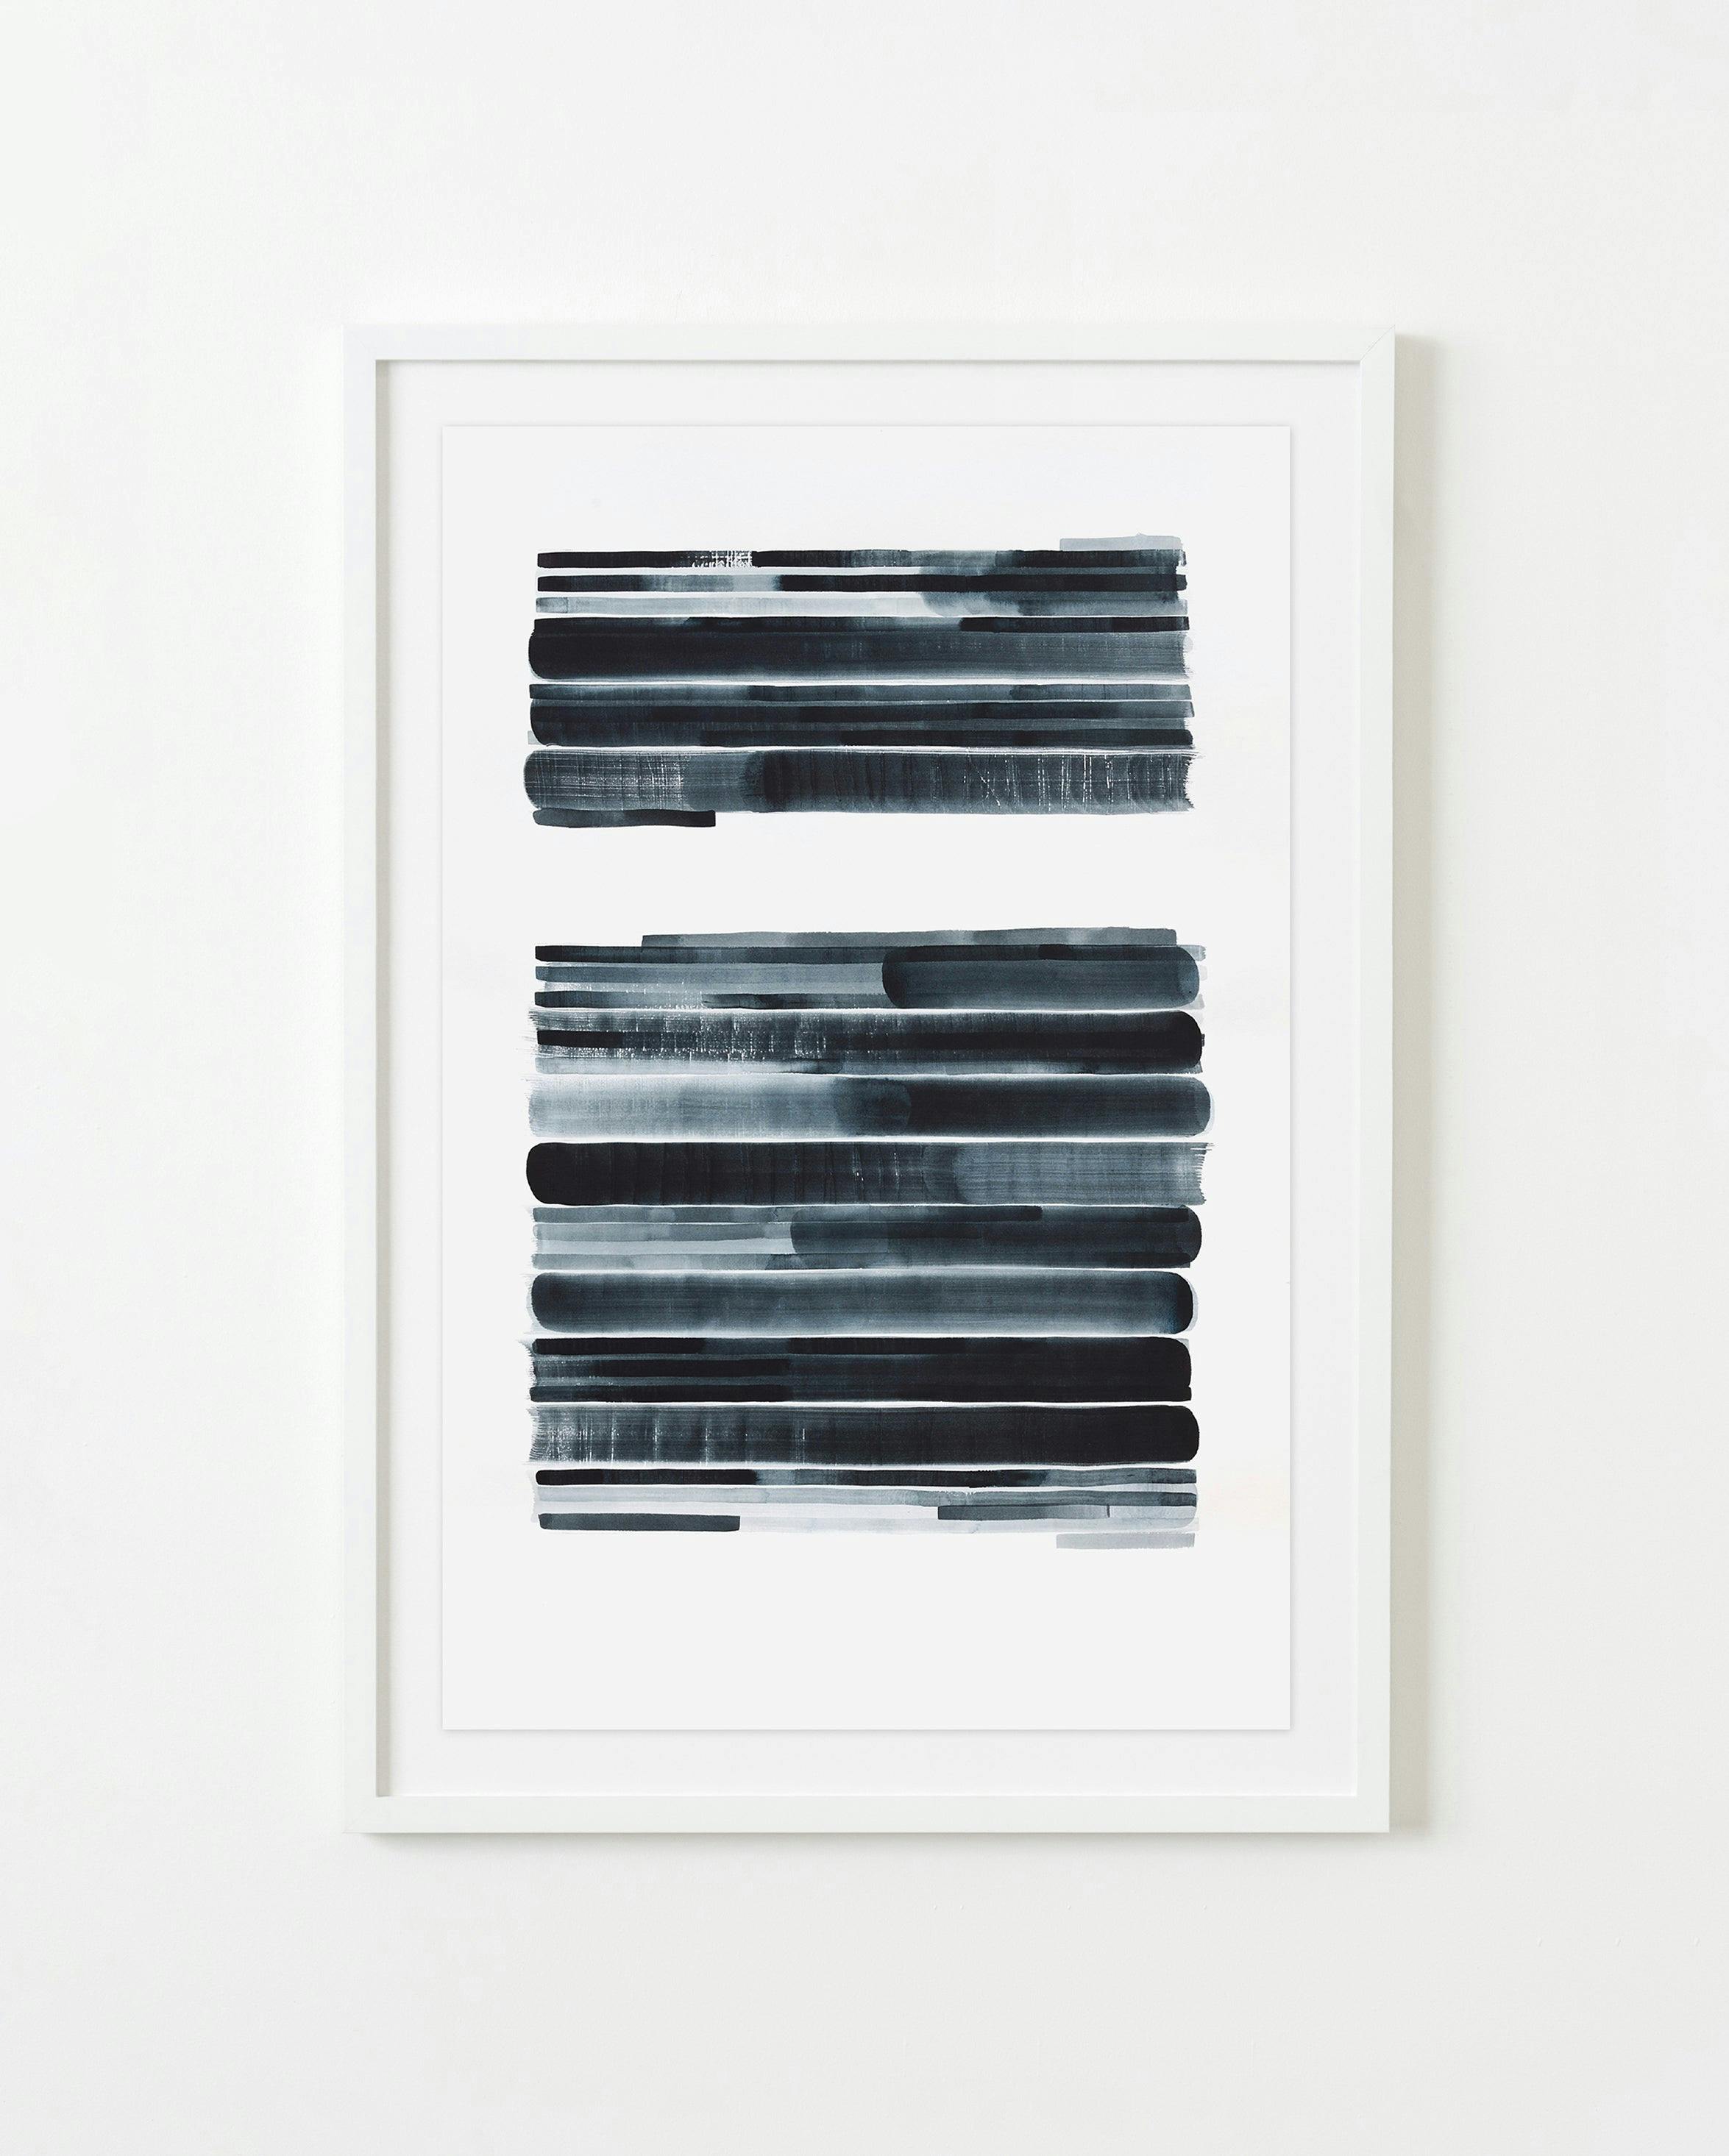 Painting by Gail Tarantino titled "Redaction Revisited-Version VI".